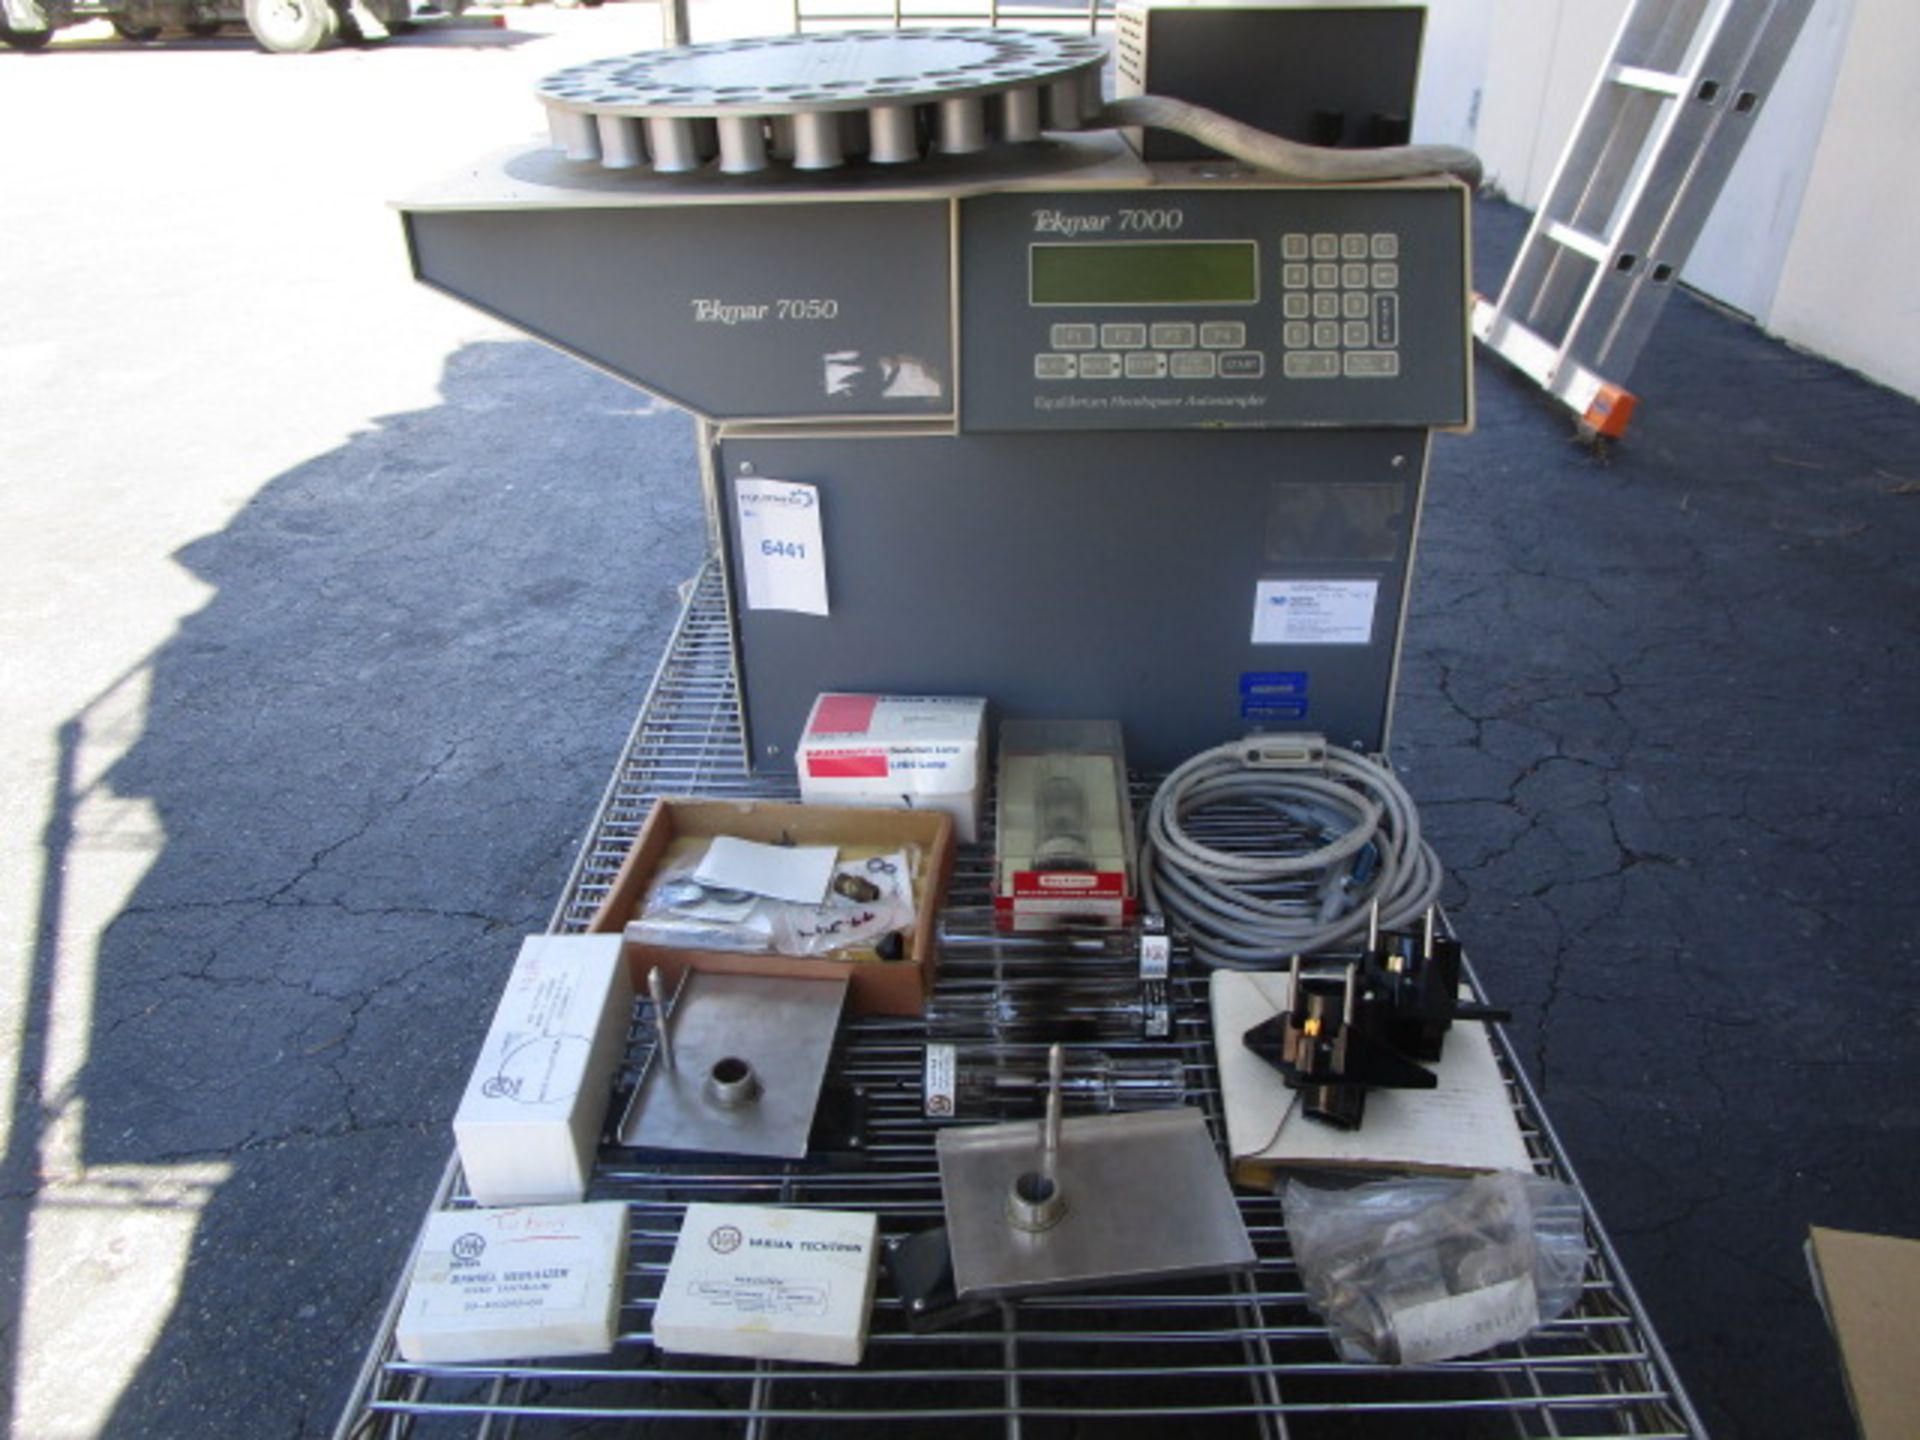 Tekmar 7000 equilibrium headspace Autosampler with Tekmar 7050 comes with accessories and cables - Image 5 of 12